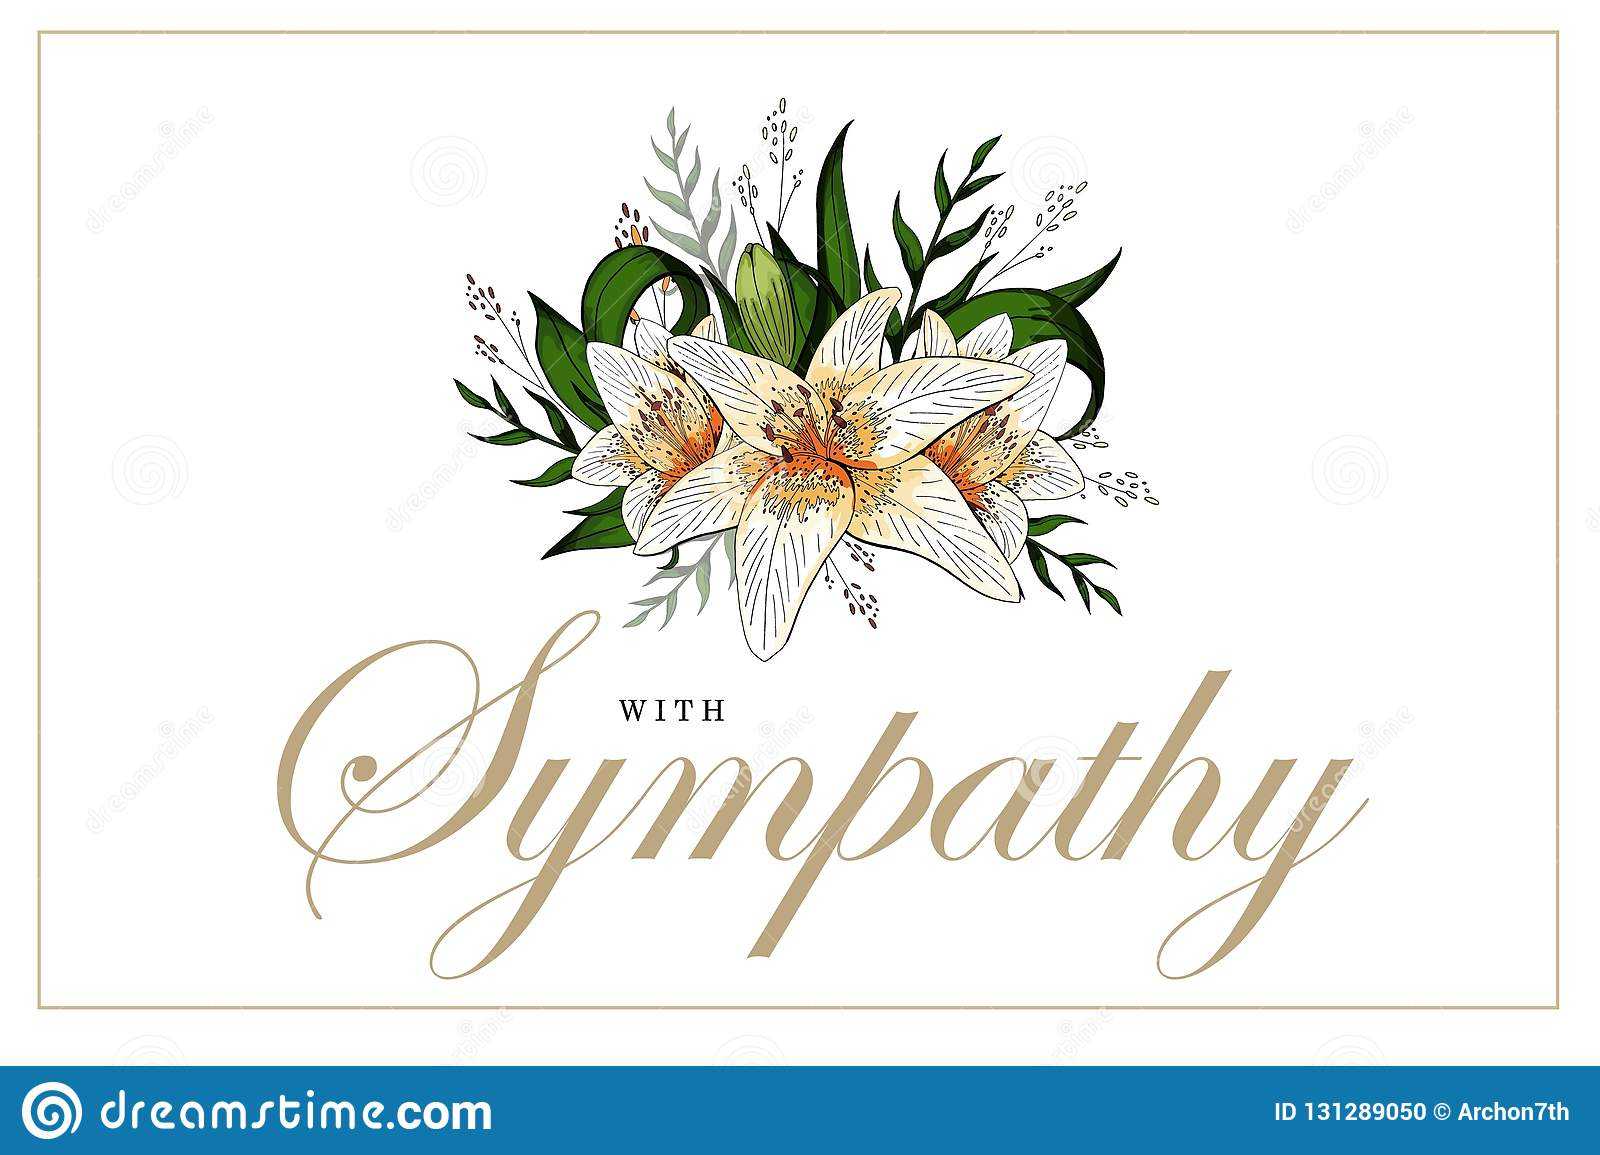 Condolences Sympathy Card Floral Lily Bouquet And Lettering Within Sorry For Your Loss Card Template